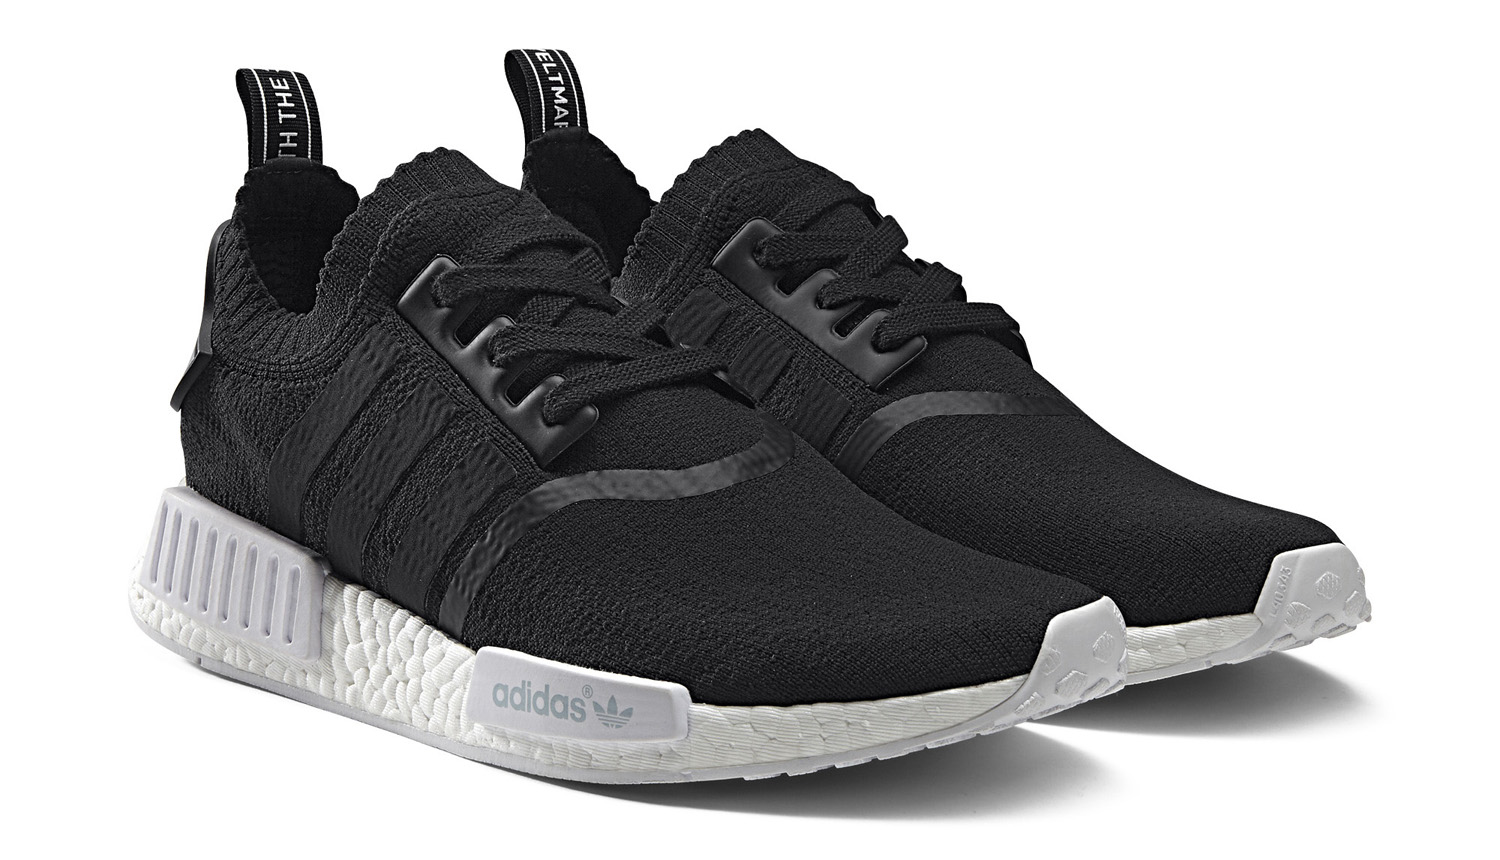 Adidas NMD White Black Sole Collector